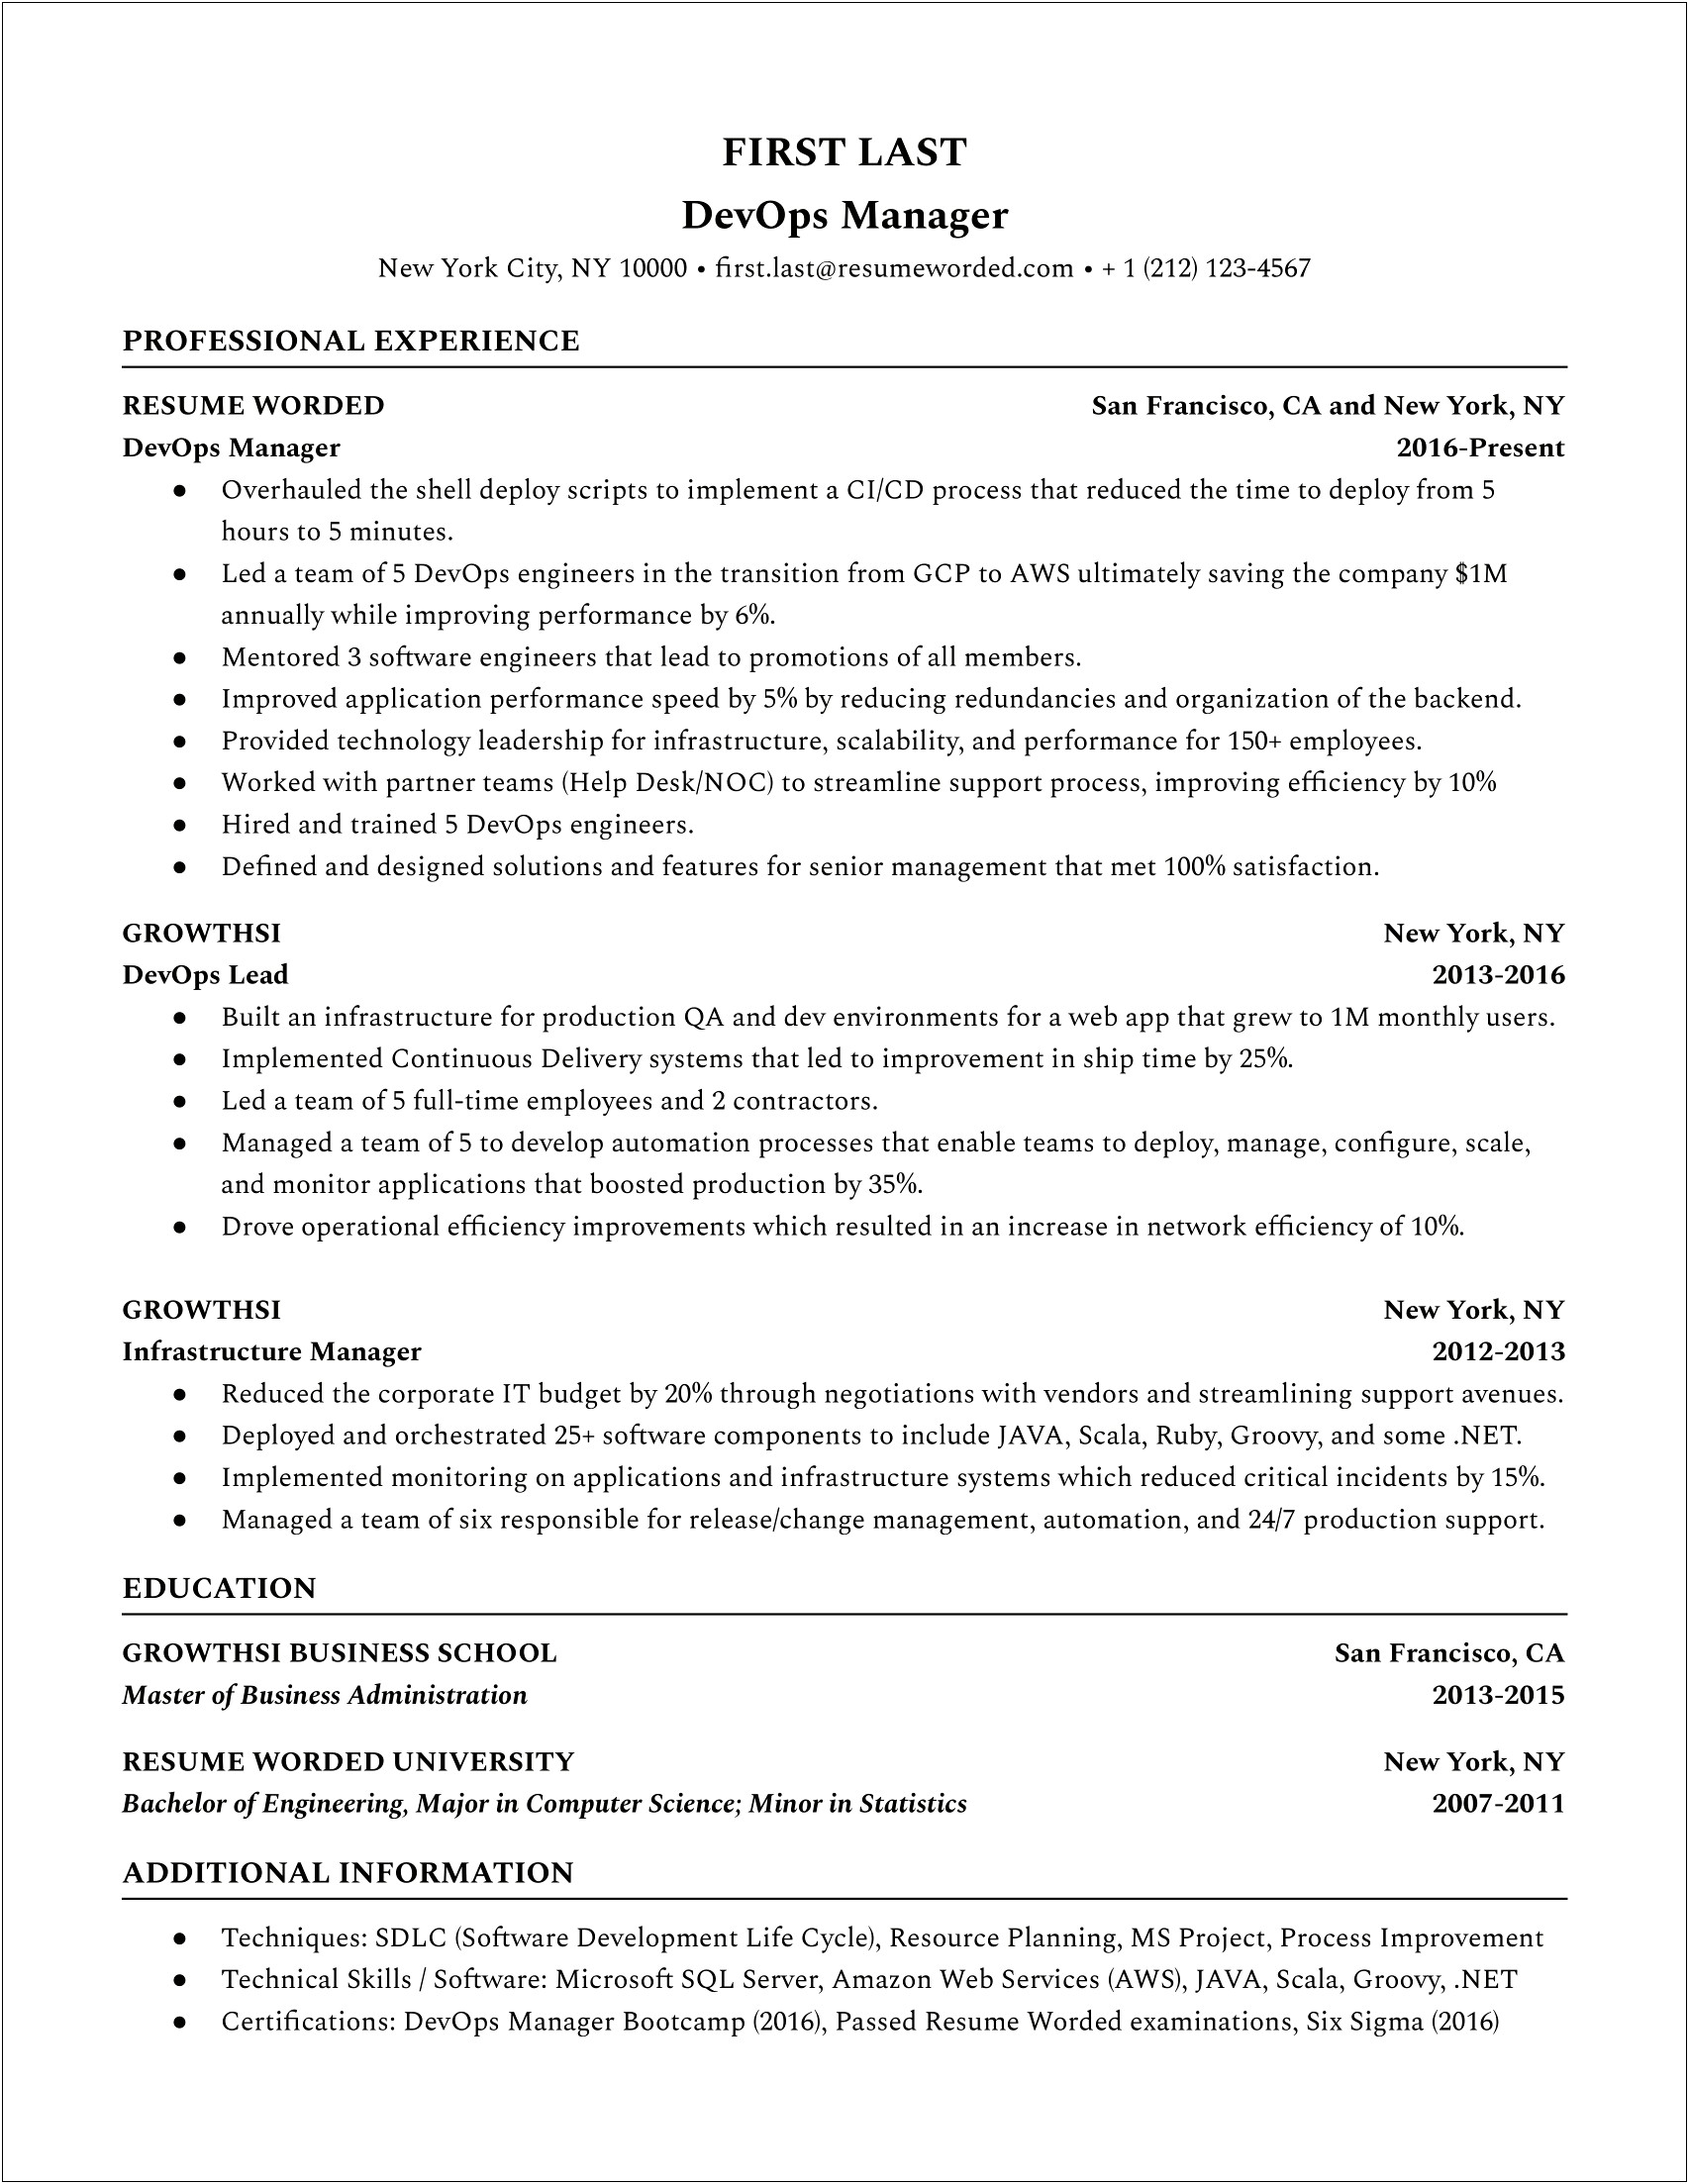 Resume Of Software Delivery Manager